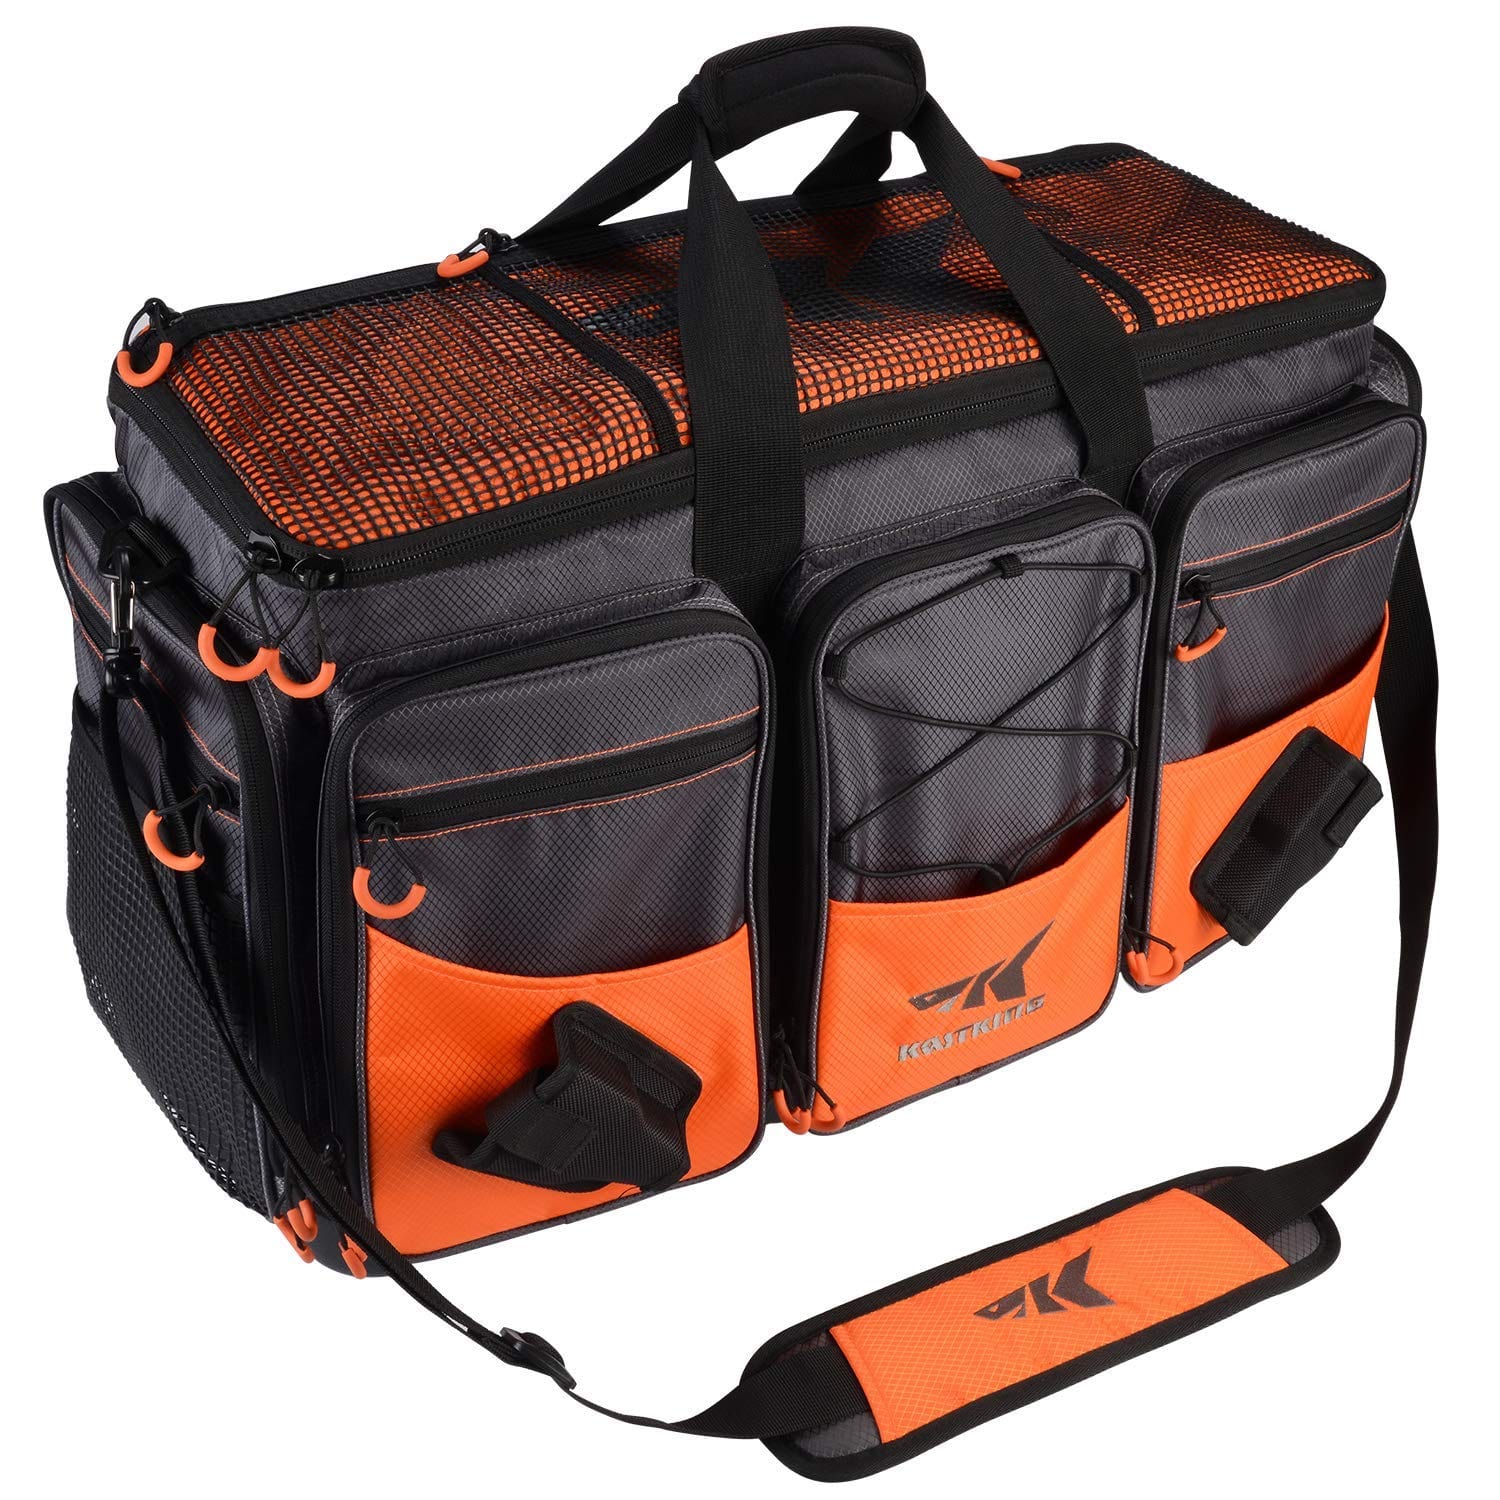 KastKing Fishing Tackle Bags - A: Medium-Hoss(Without Trays, 15